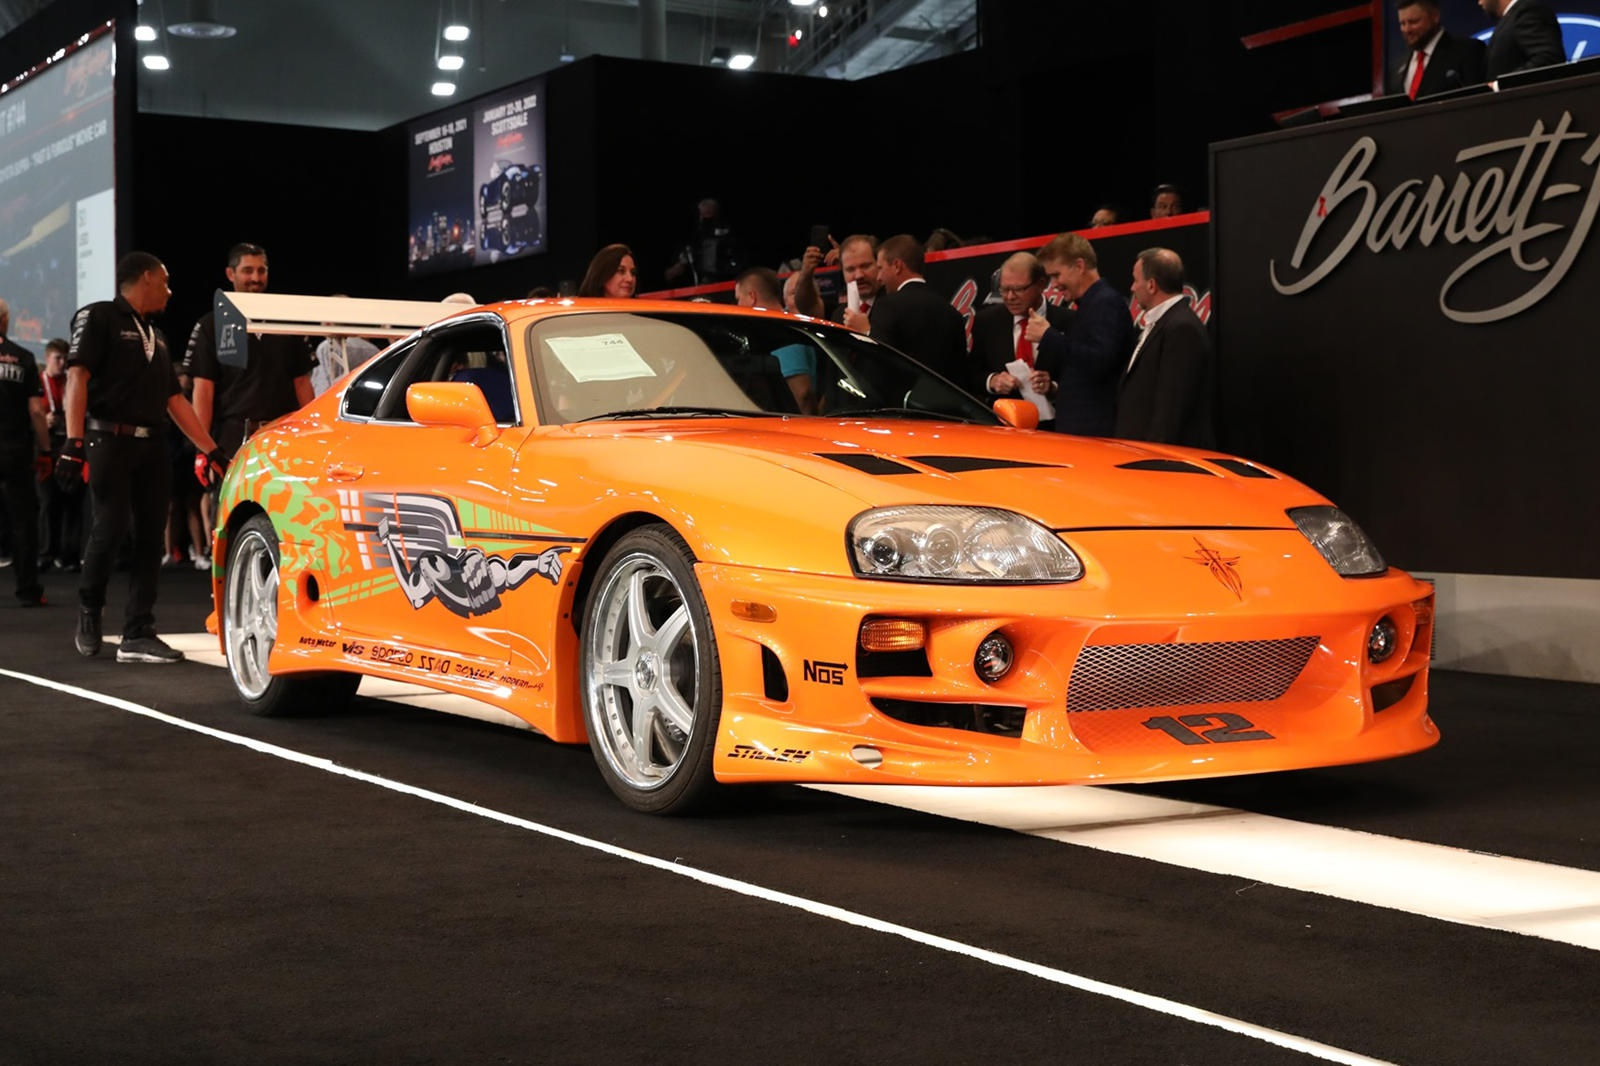 Toyota Supra trong phim 'Fast & Furious' anh 1